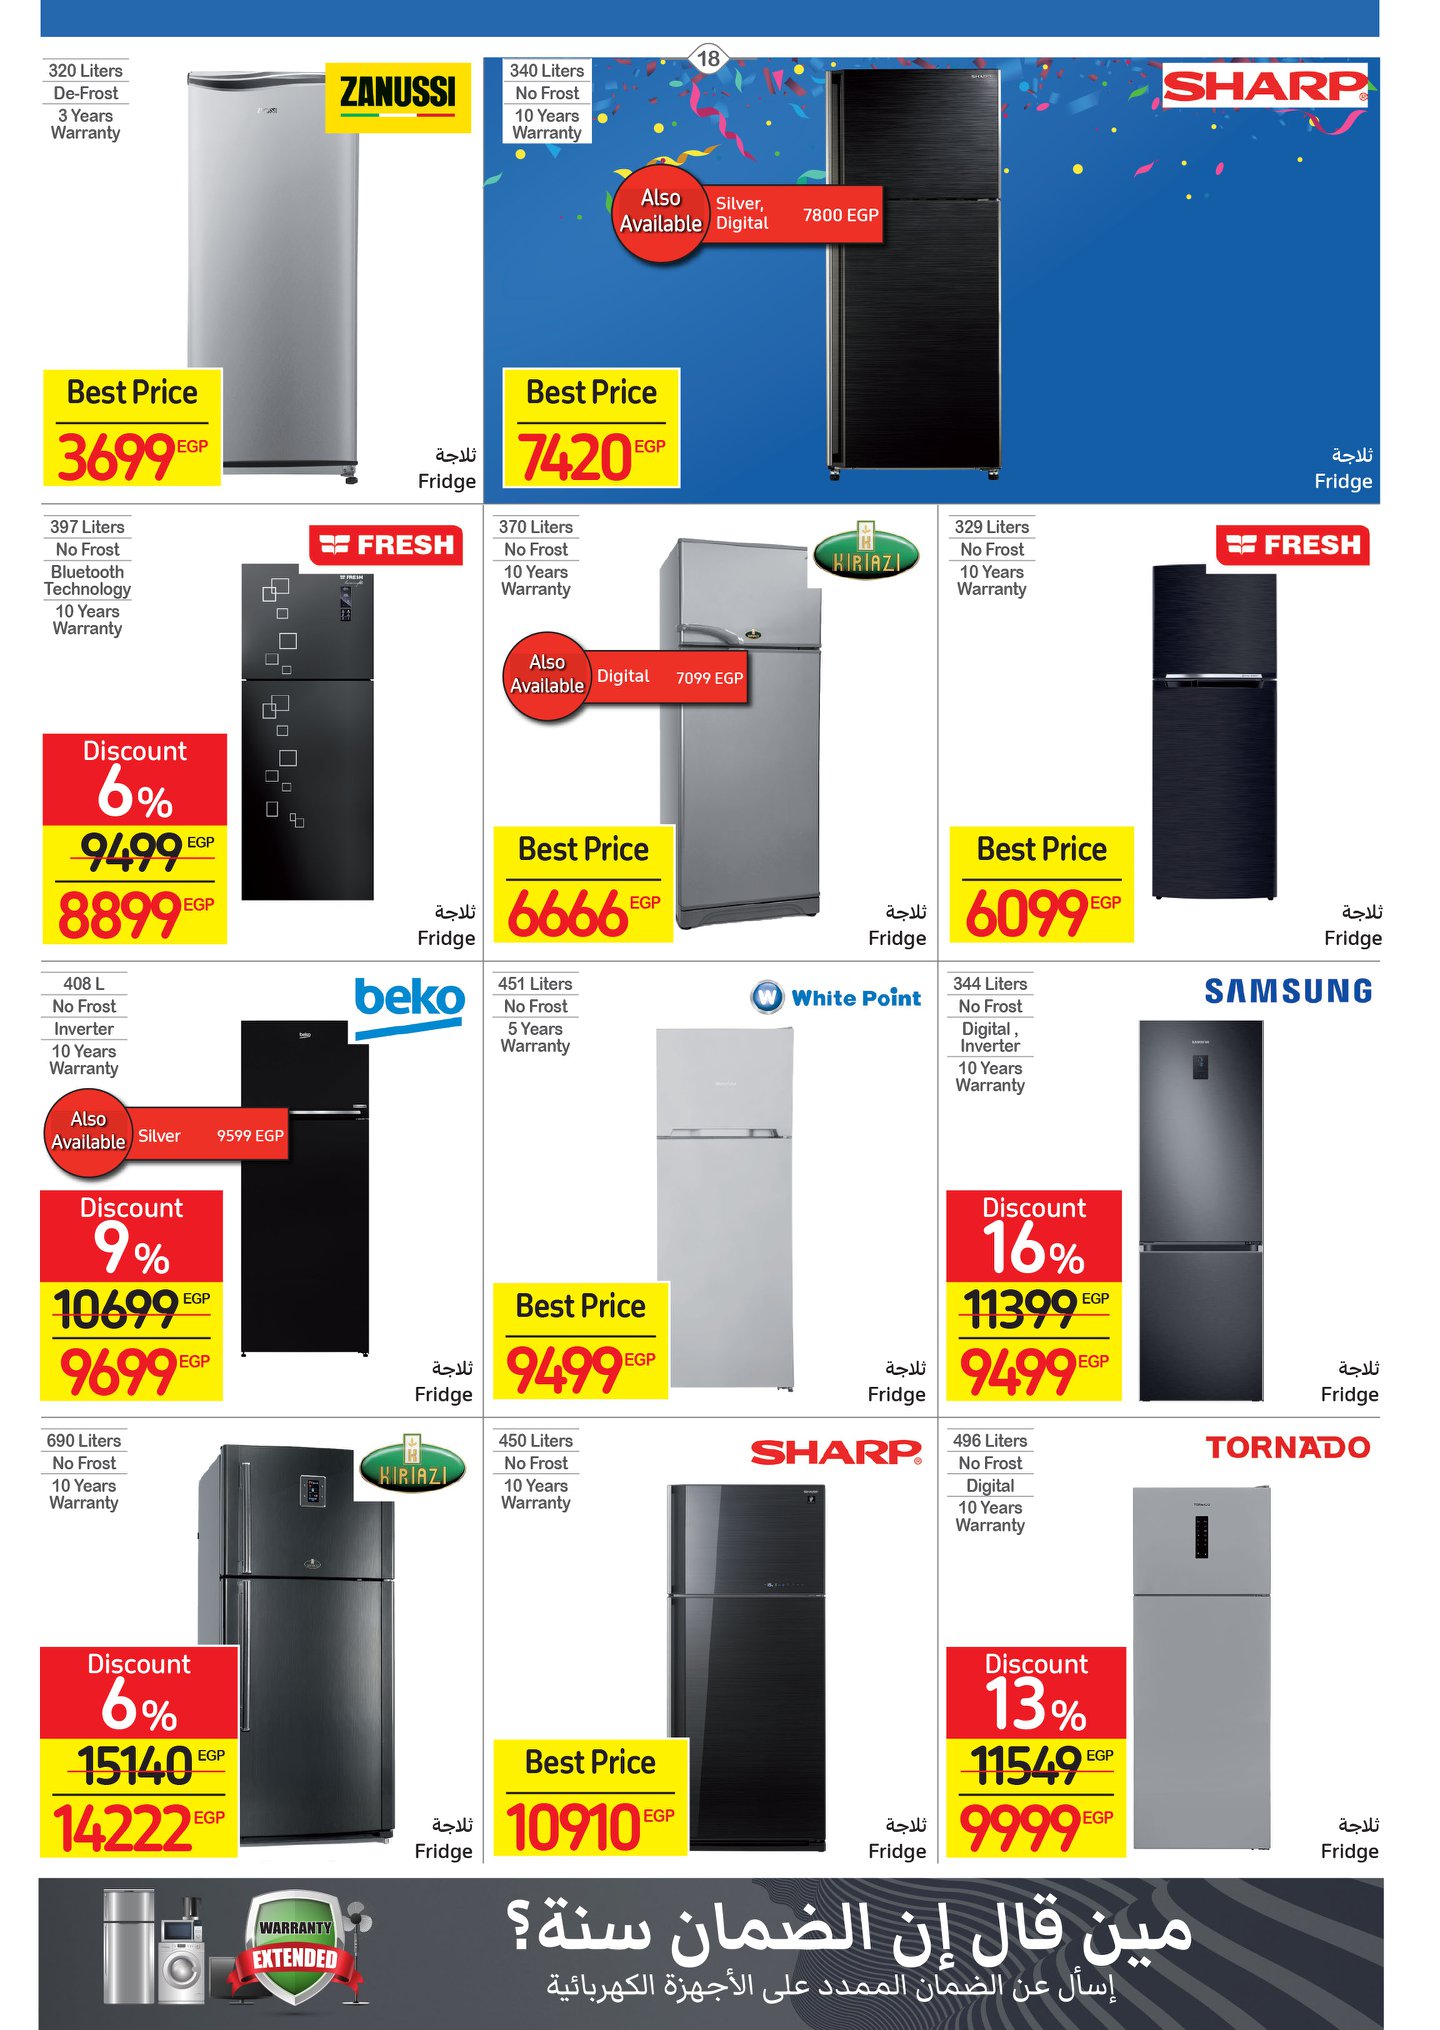 Carrefour magazine offers full 50% discounts and a surprise purchase in convenient installments without interest 22